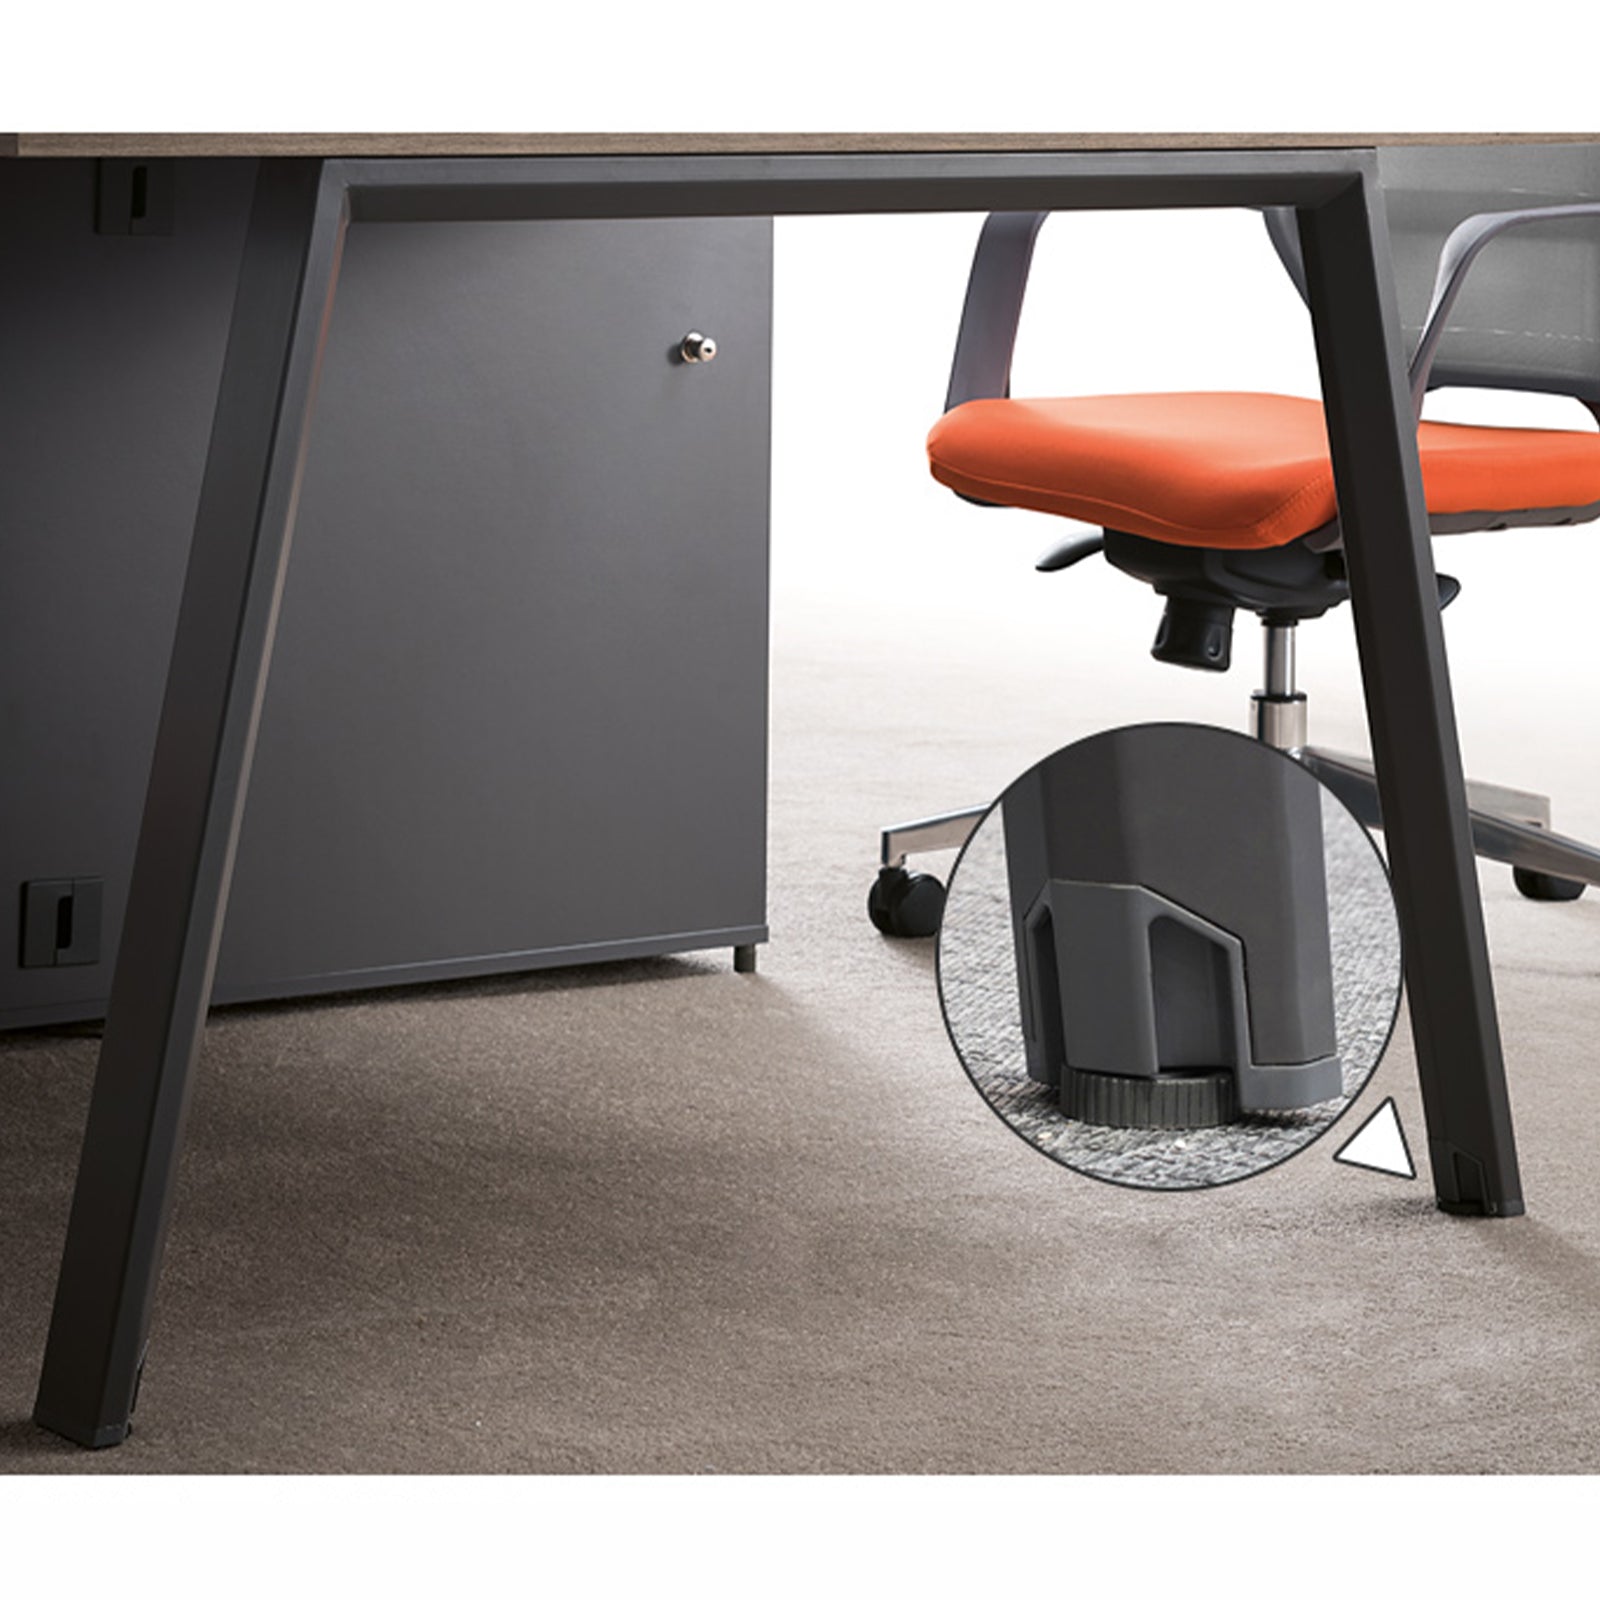 VOFFOV® Workstaion Cluster of 2 Face to Face Desk w/ Storage